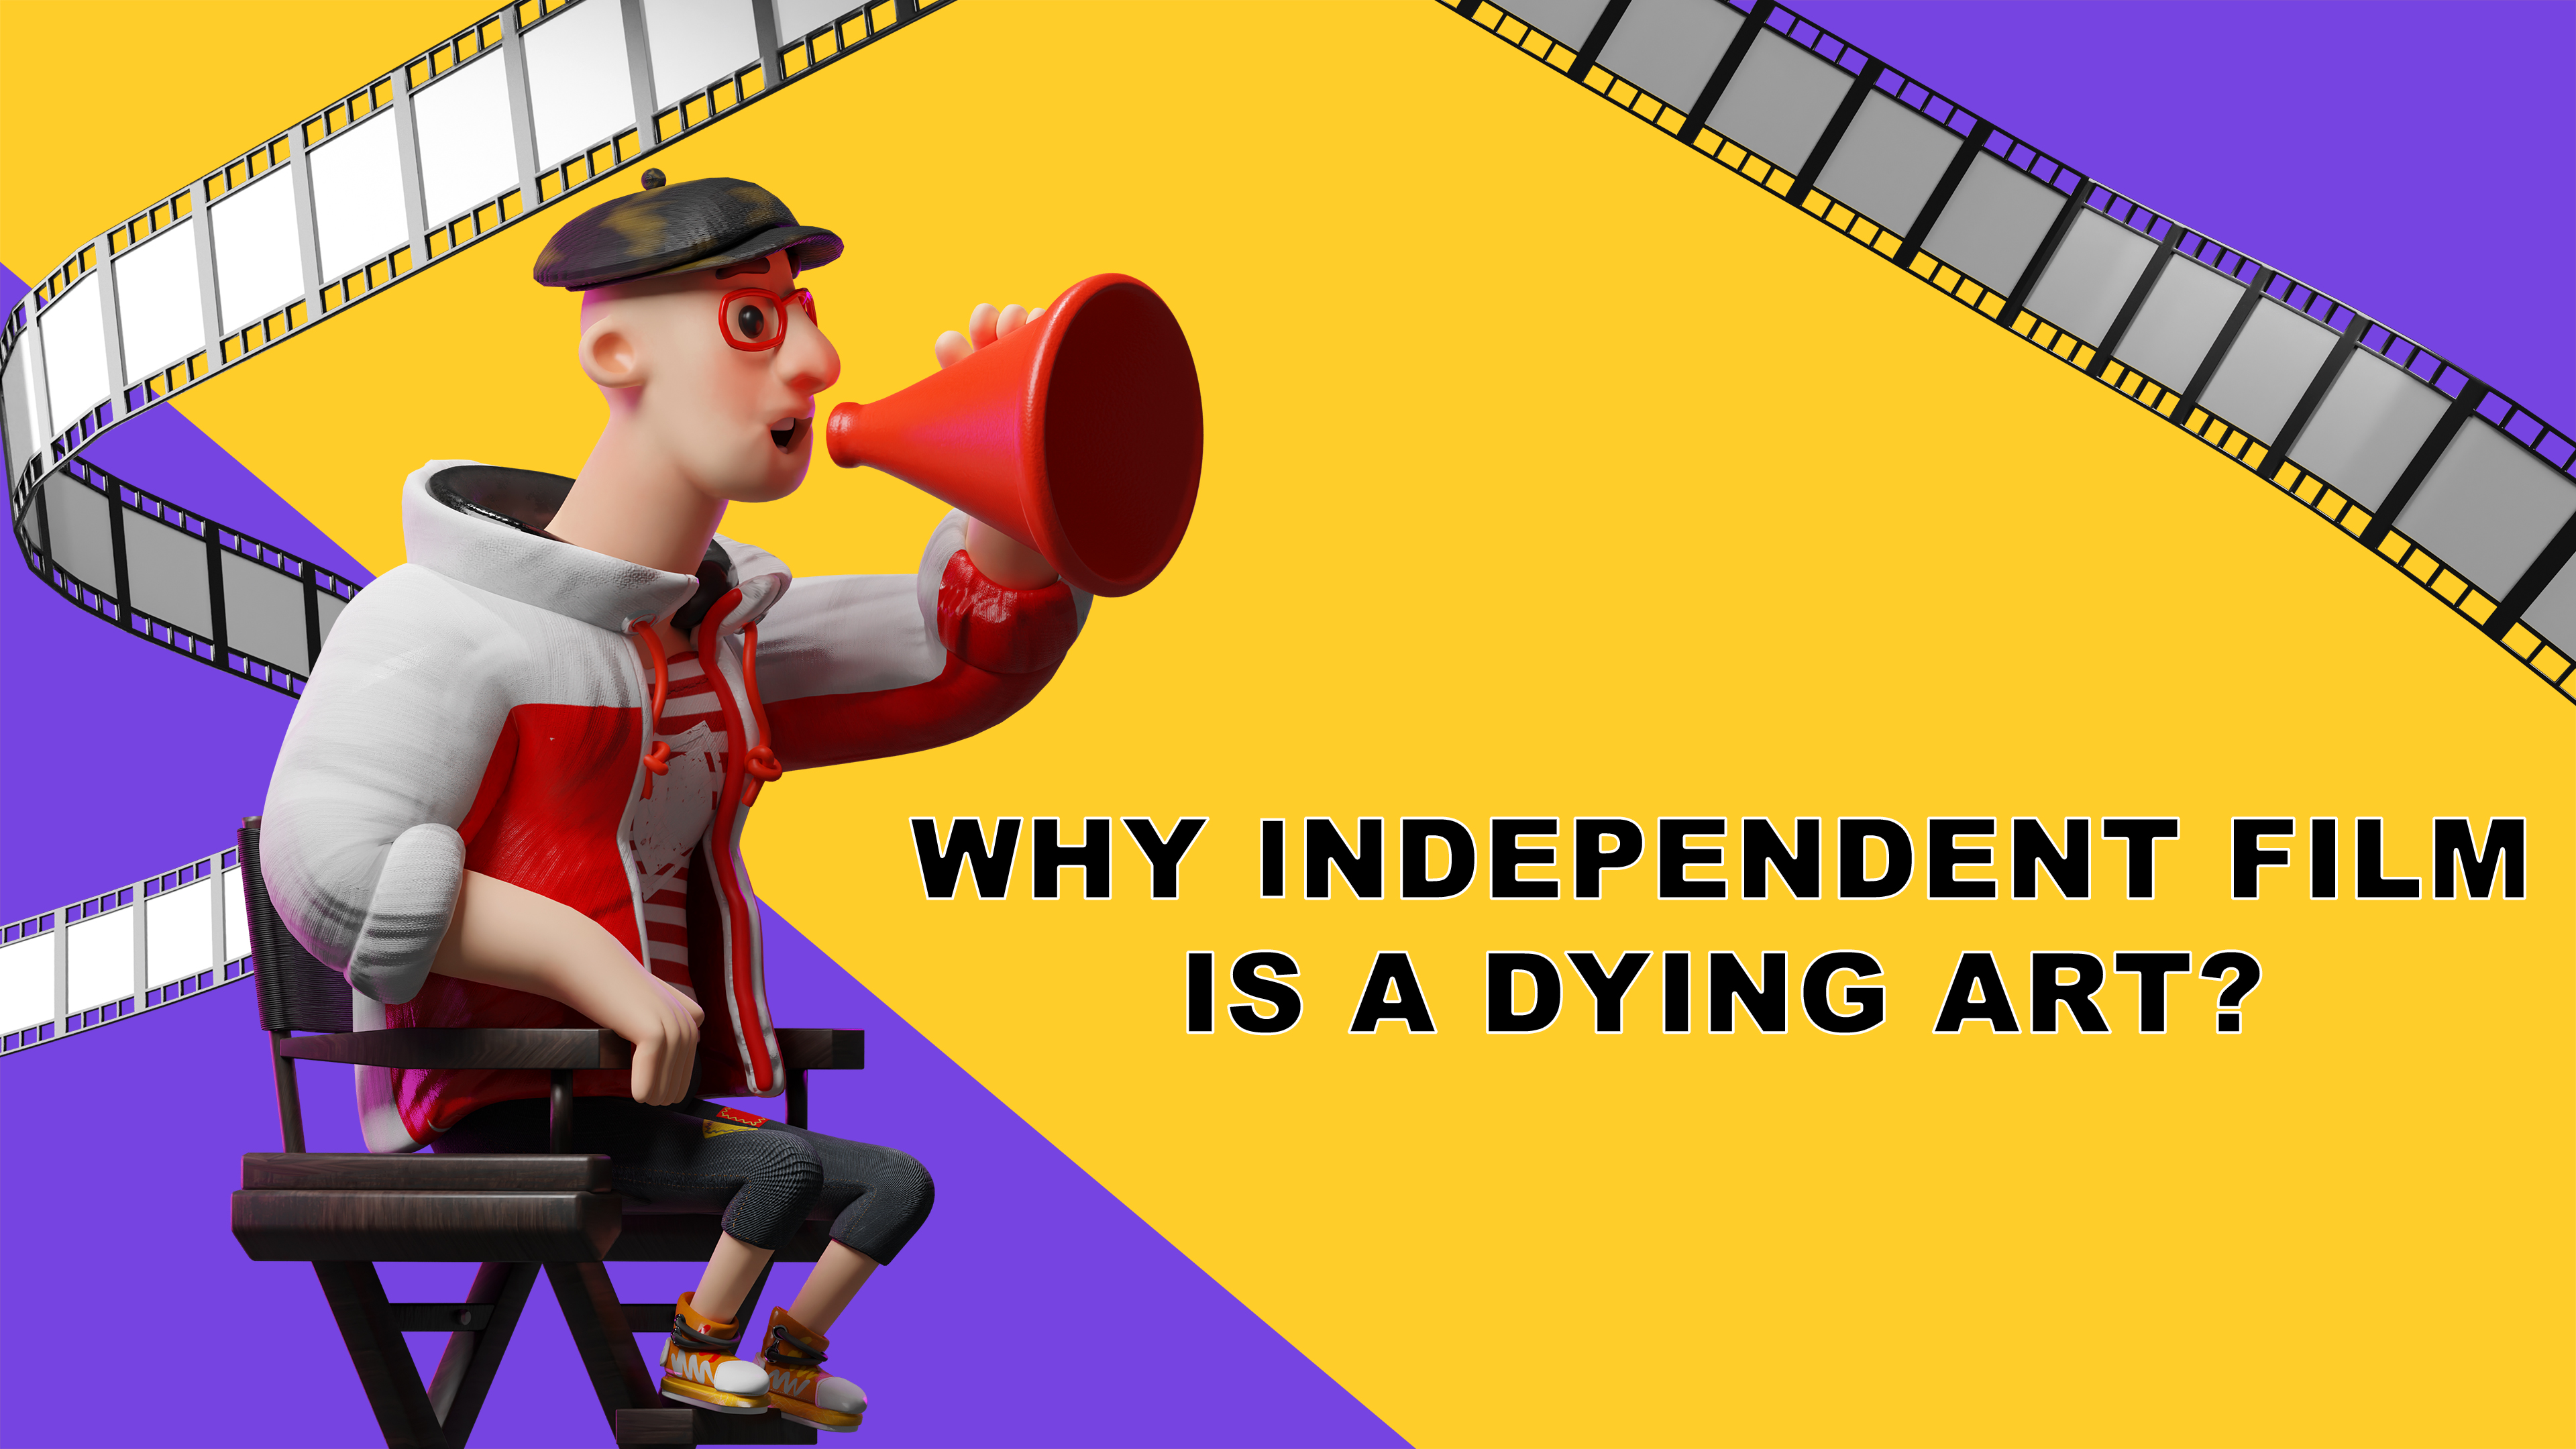 Are Independent Films a dying art?